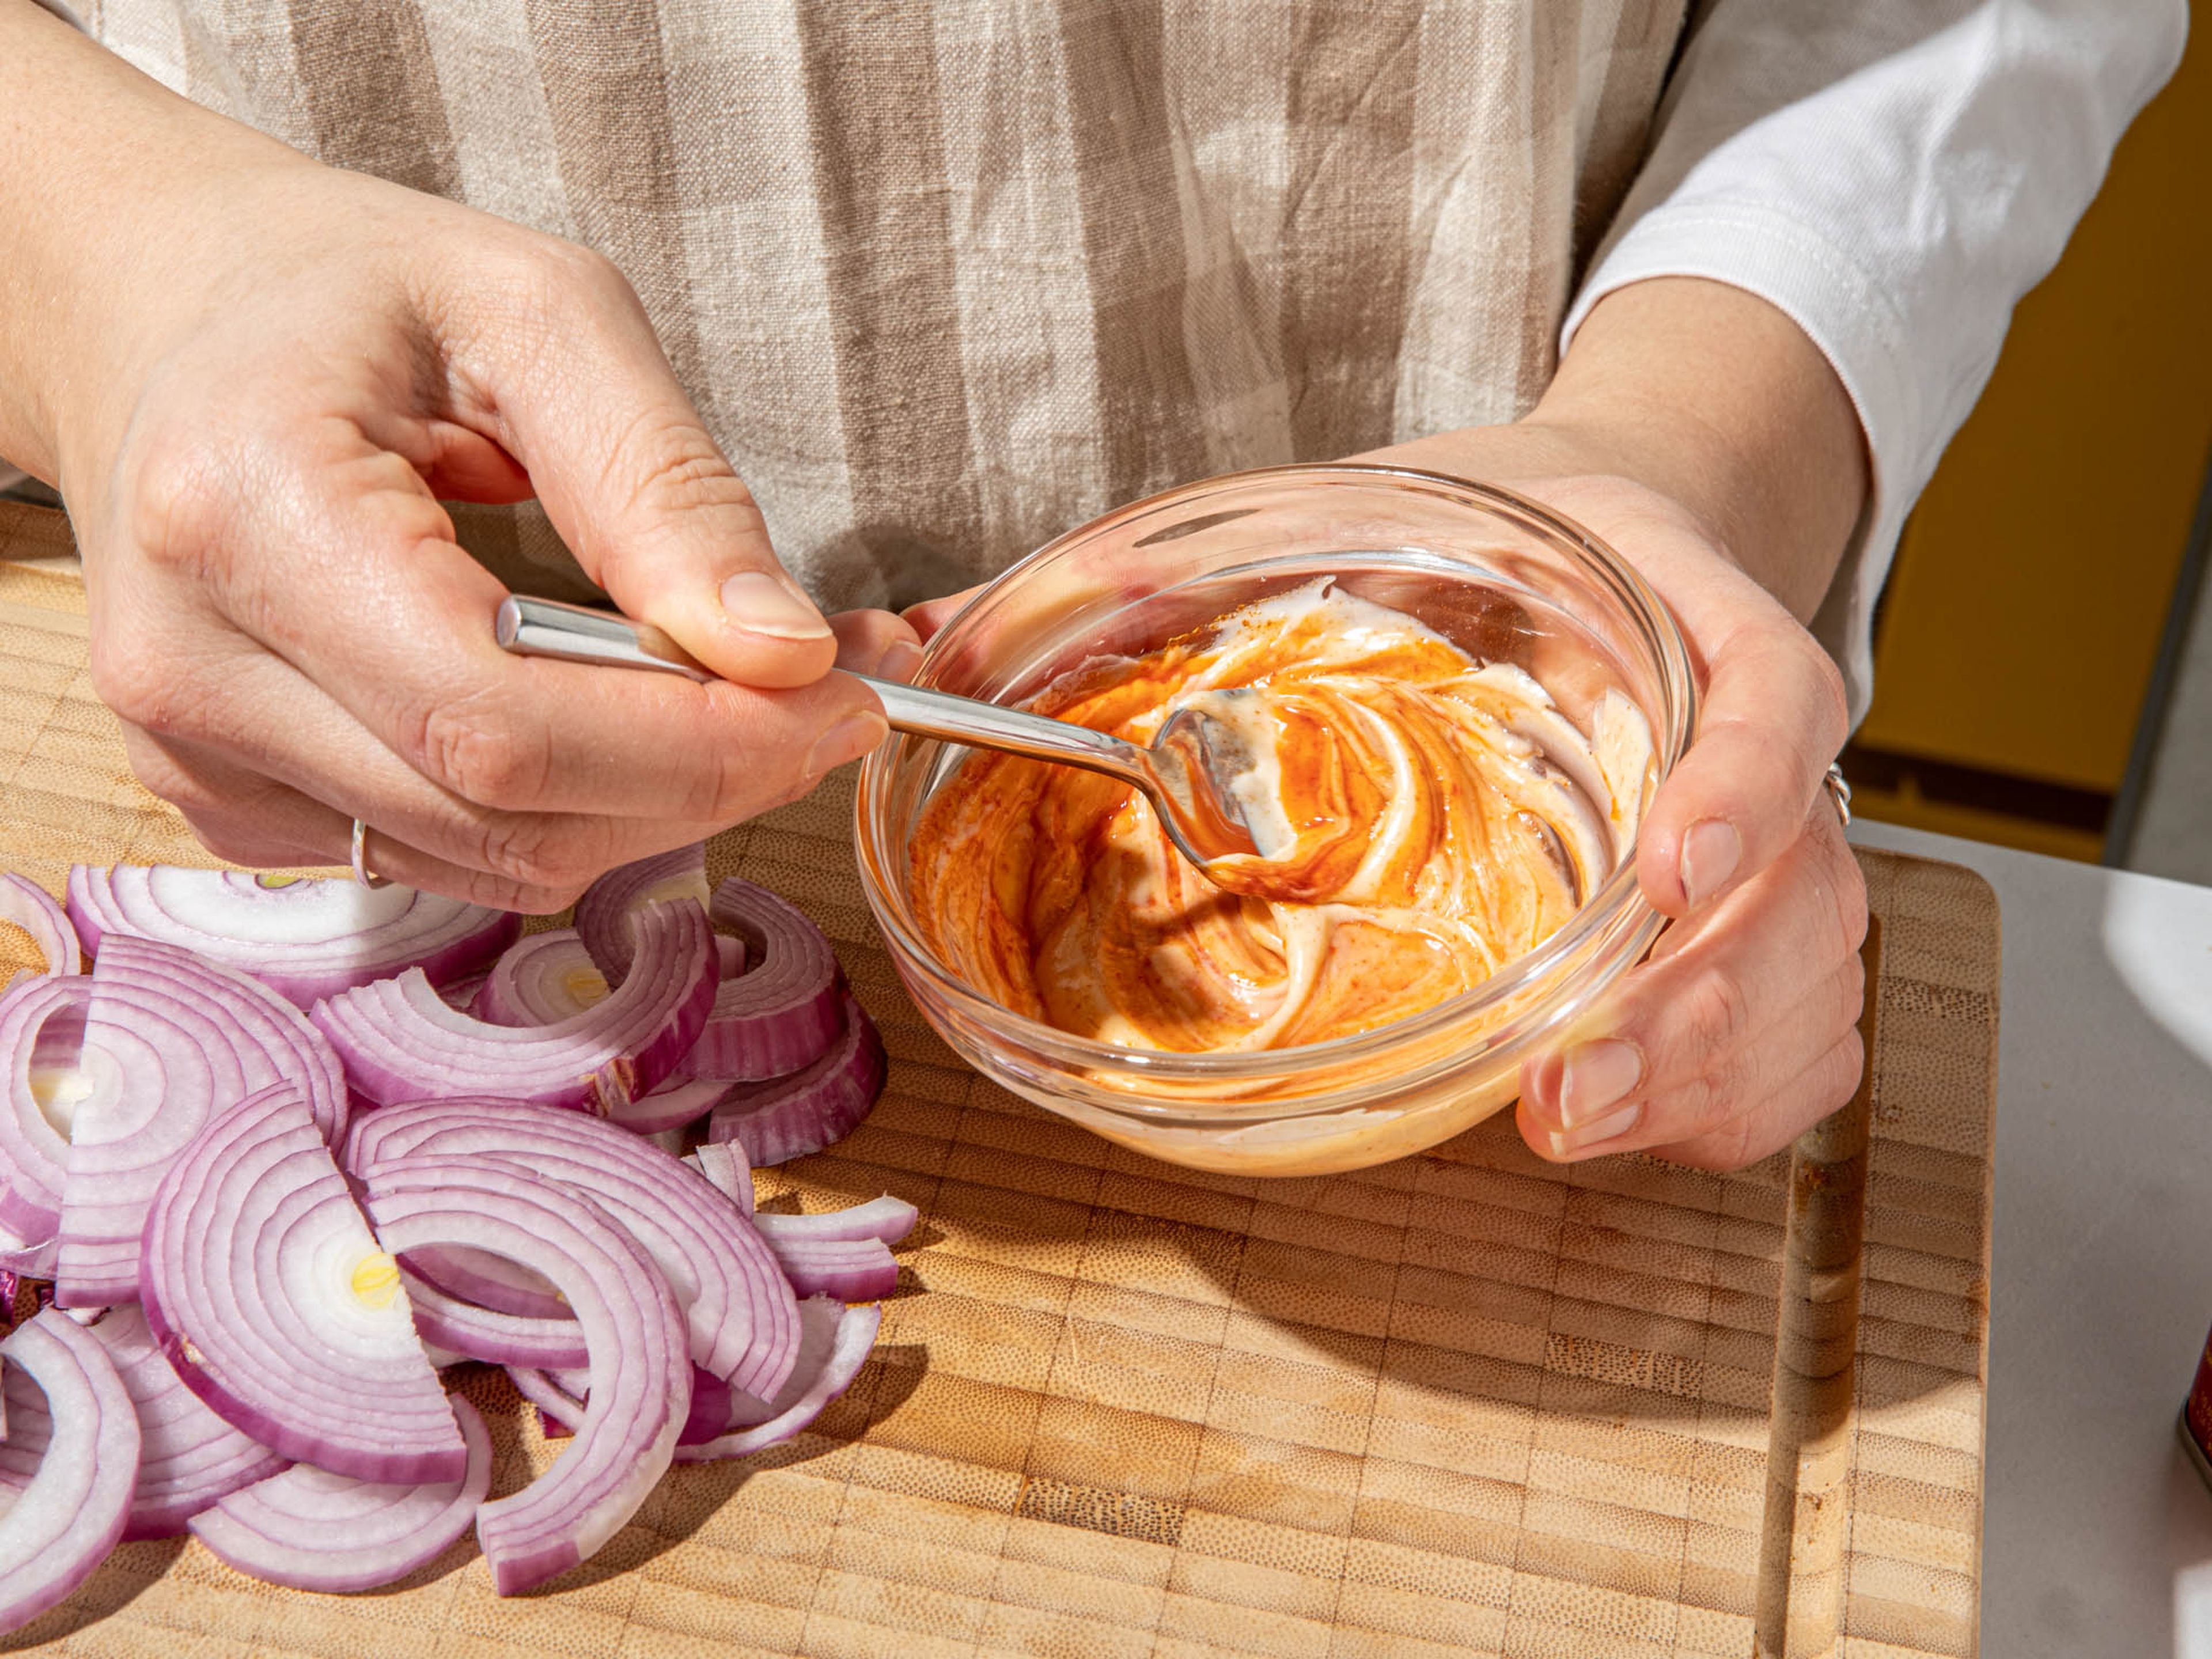 Finely slice onion into rings. Melt butter in a small pot or frying pan over medium heat. Add onions and stir briefly. Season with salt, lower heat slightly and let cook until caramelized, for approx. 15 – 20 min. Meanwhile, in a small bowl, mix mayonnaise, smoky paprika powder, and sriracha and set aside.